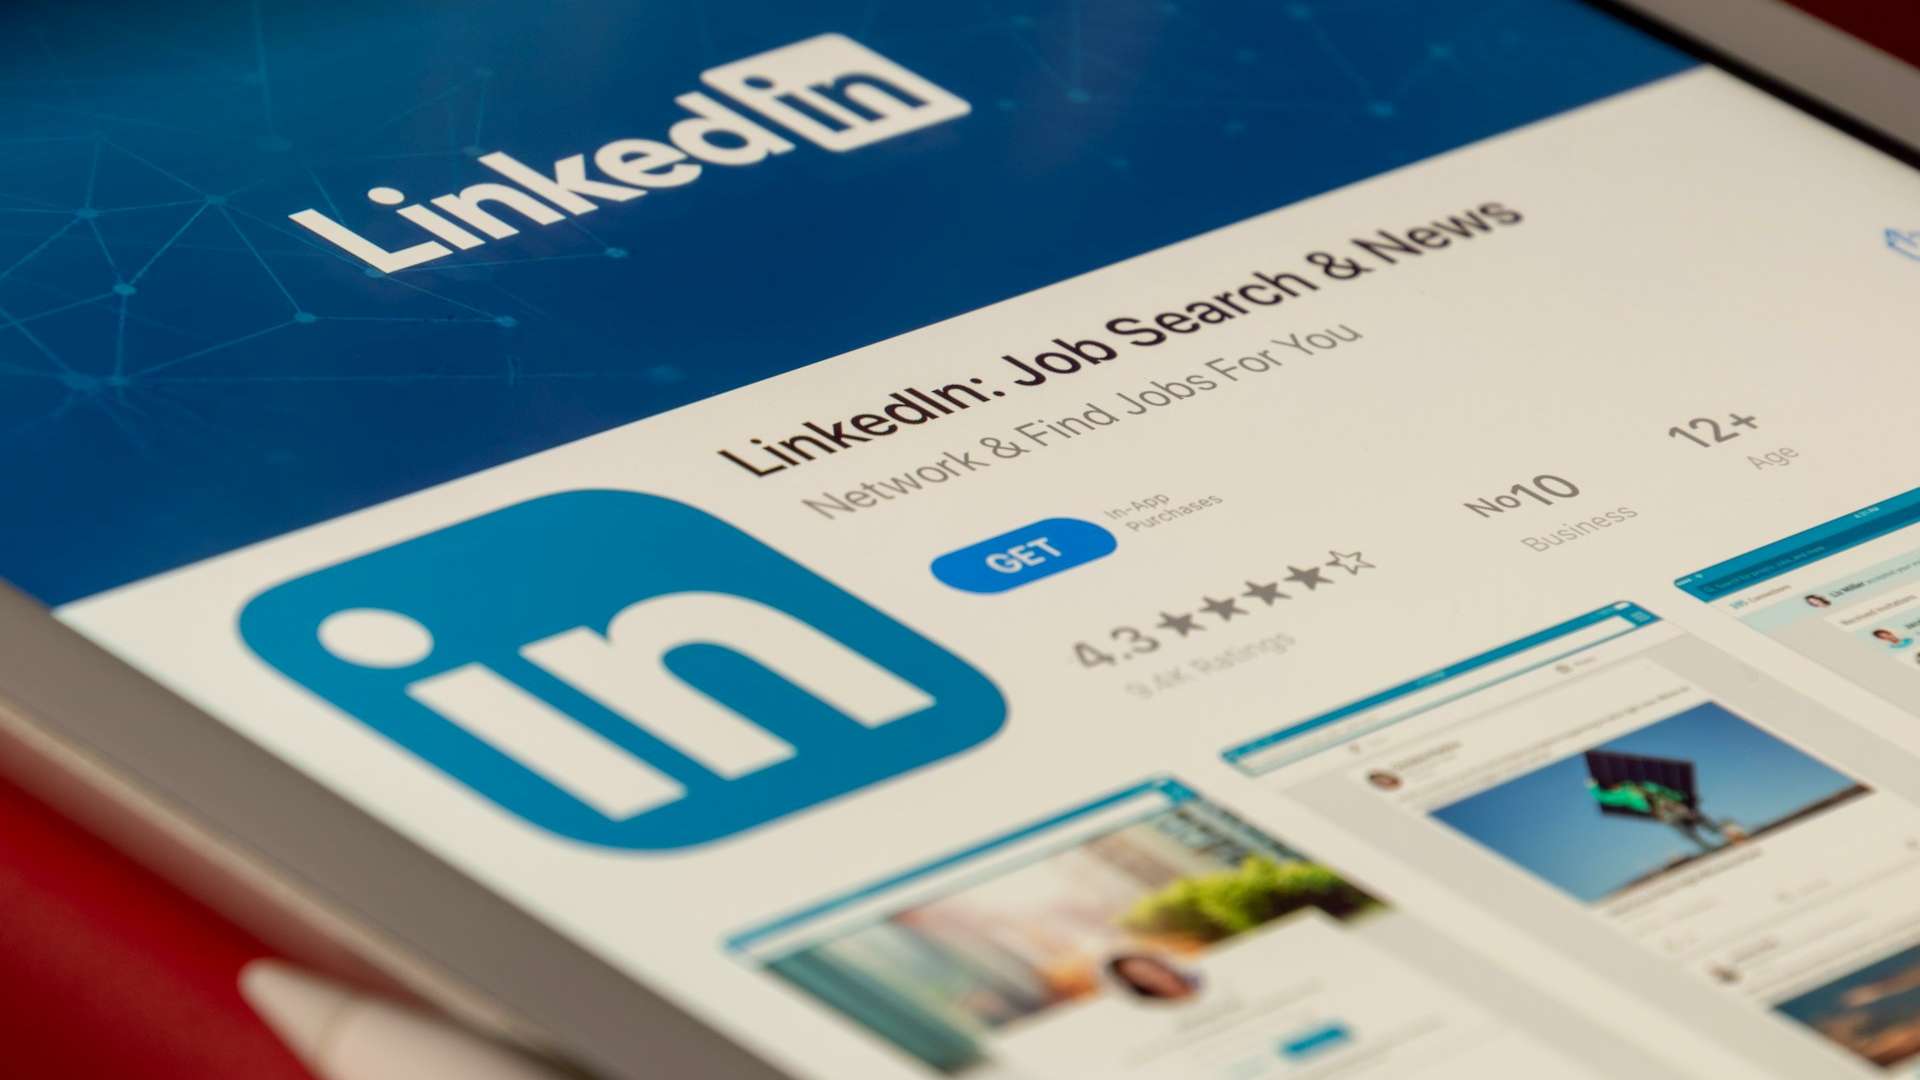 Are you using LinkedIn for your acting career?